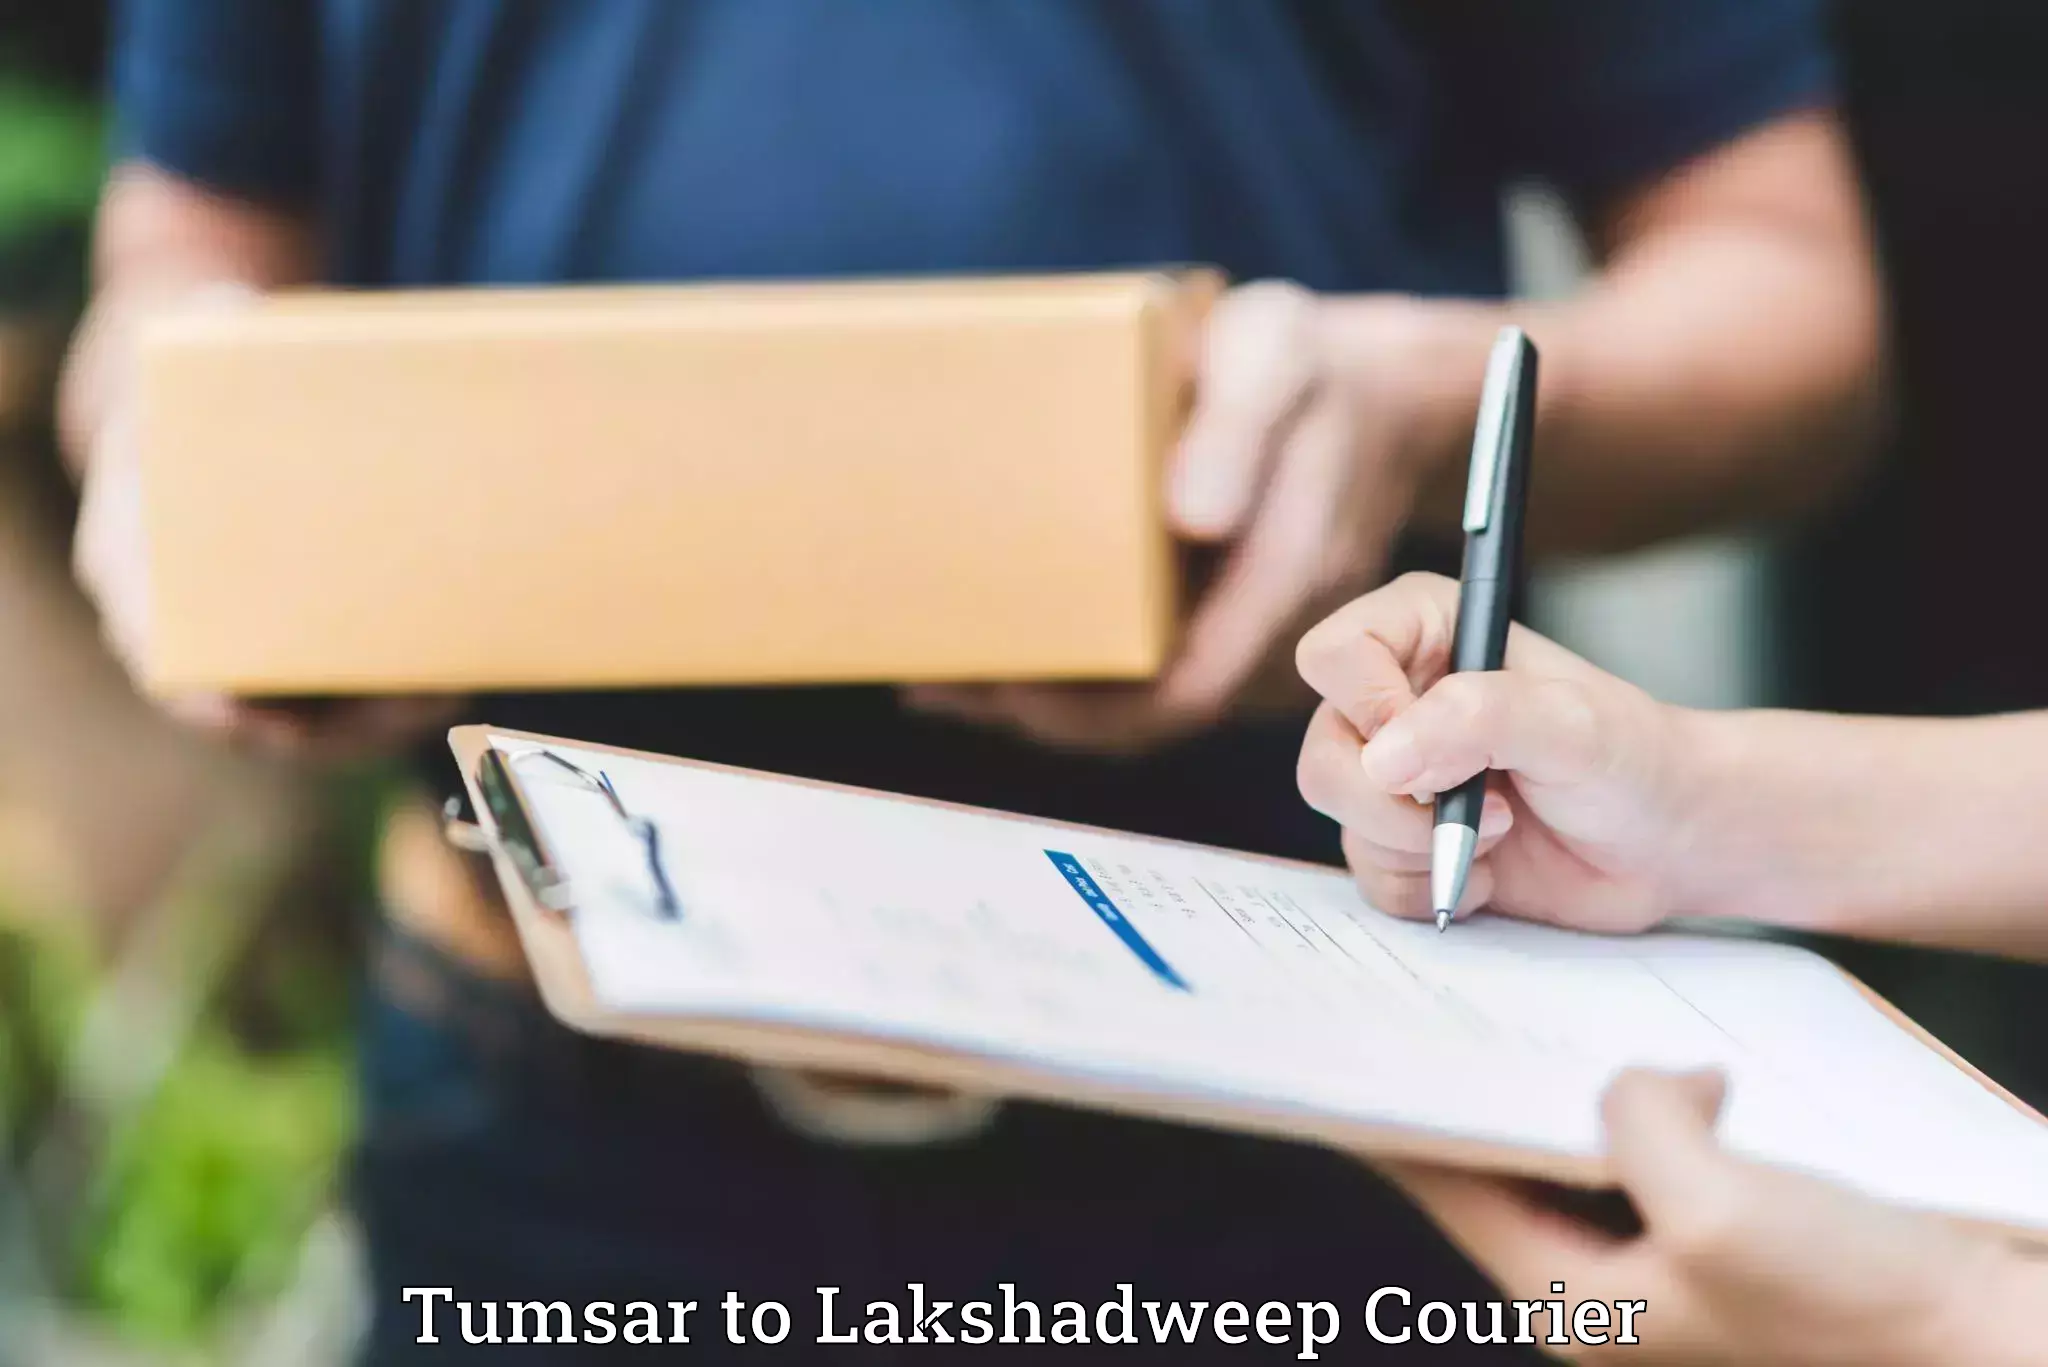 Luggage shipment specialists Tumsar to Lakshadweep